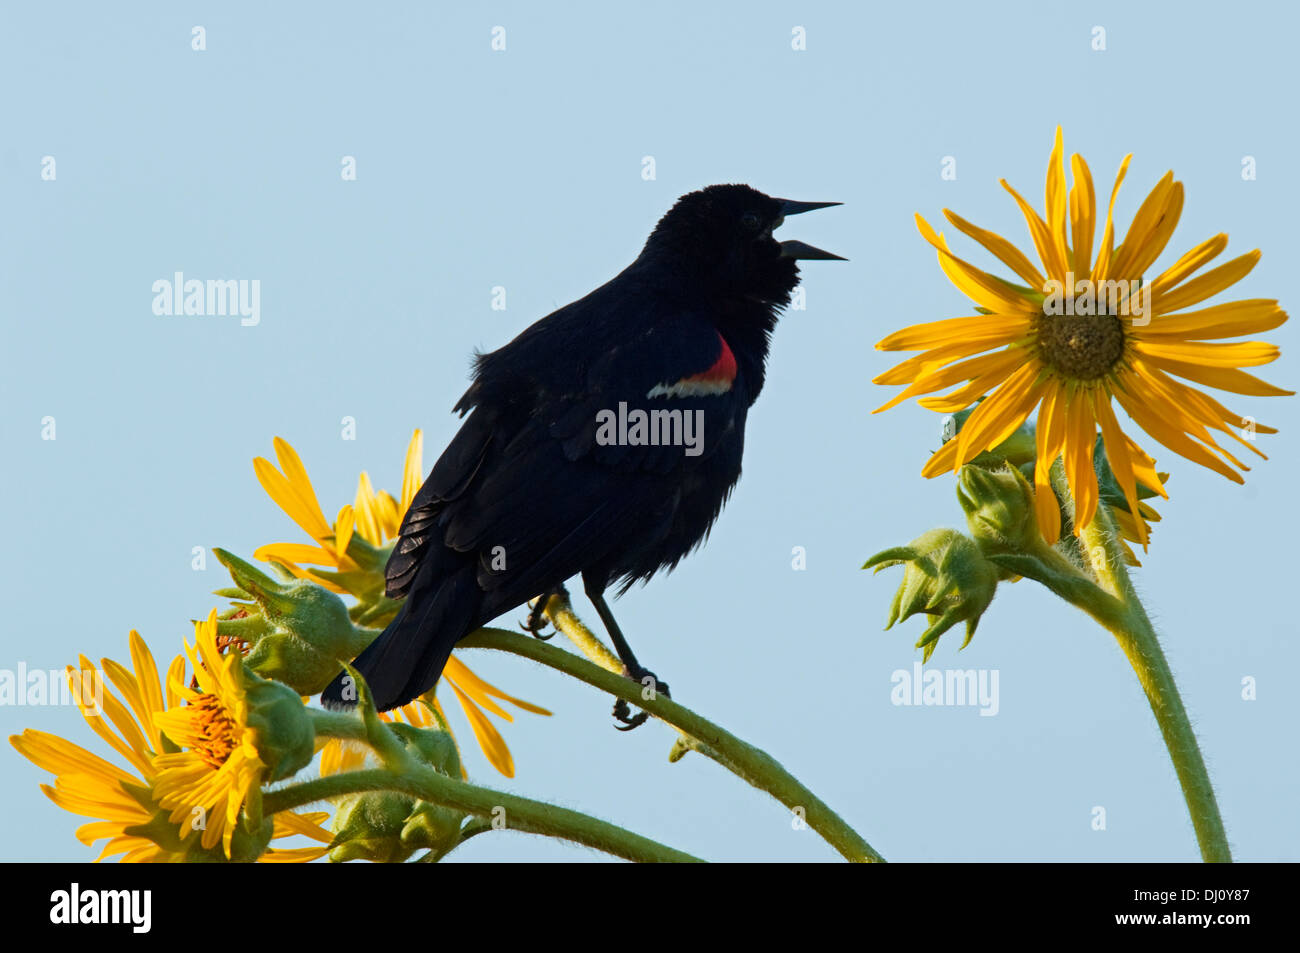 A red-winged blackbird squawks or crows, atop a sunflower in the Montrose Beach Bird Sanctuary, Chicago, Illinois, USA. Stock Photo